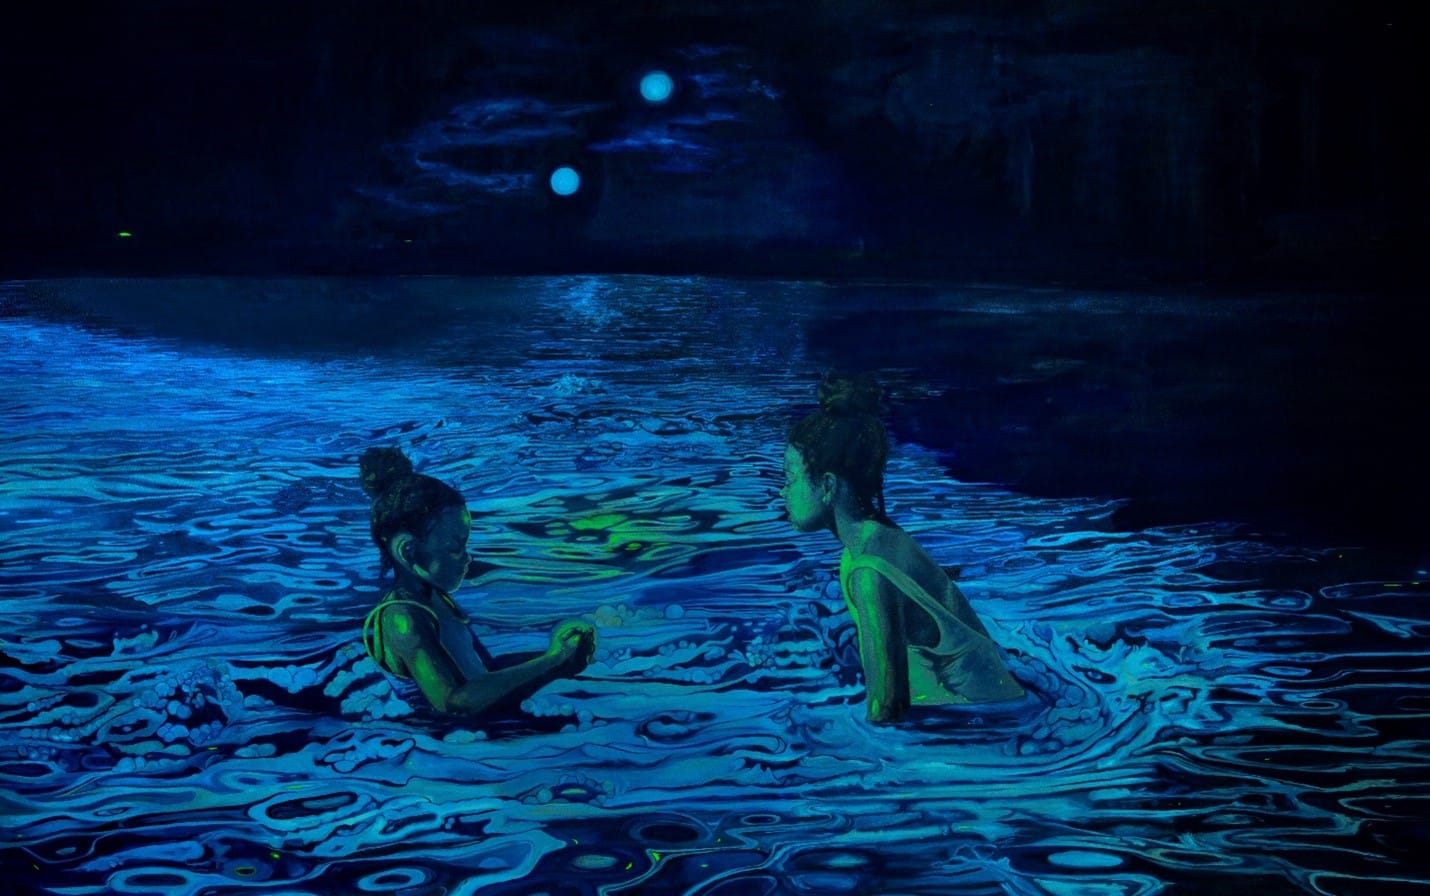 Painting of two girls in water using hues of blue and green with the moon in the background.